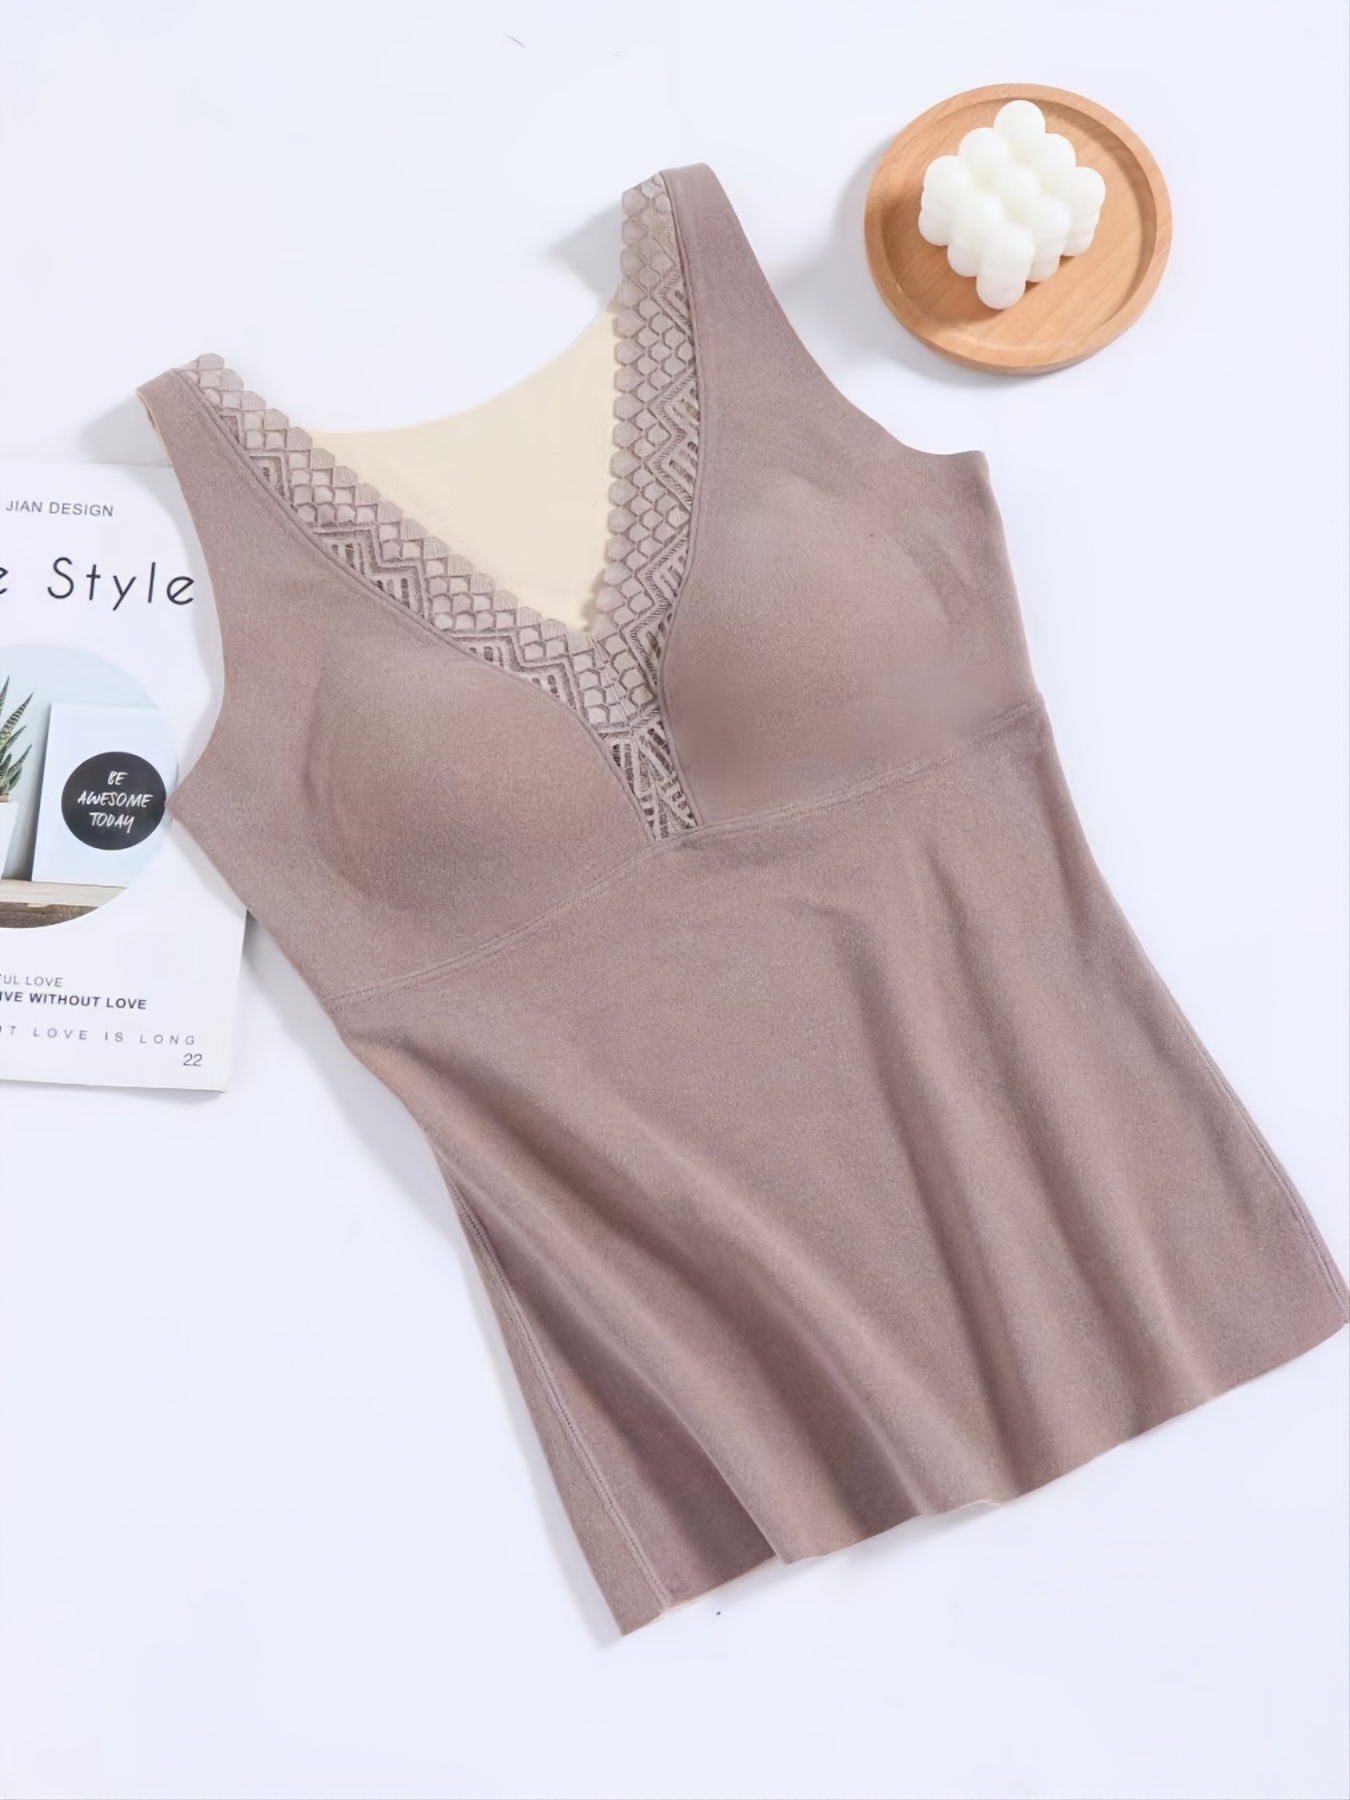 Womens Thermal Underwear Vest Warm Sleeveless Camisole Lace vest fitted  with bra for Women - Coffee 